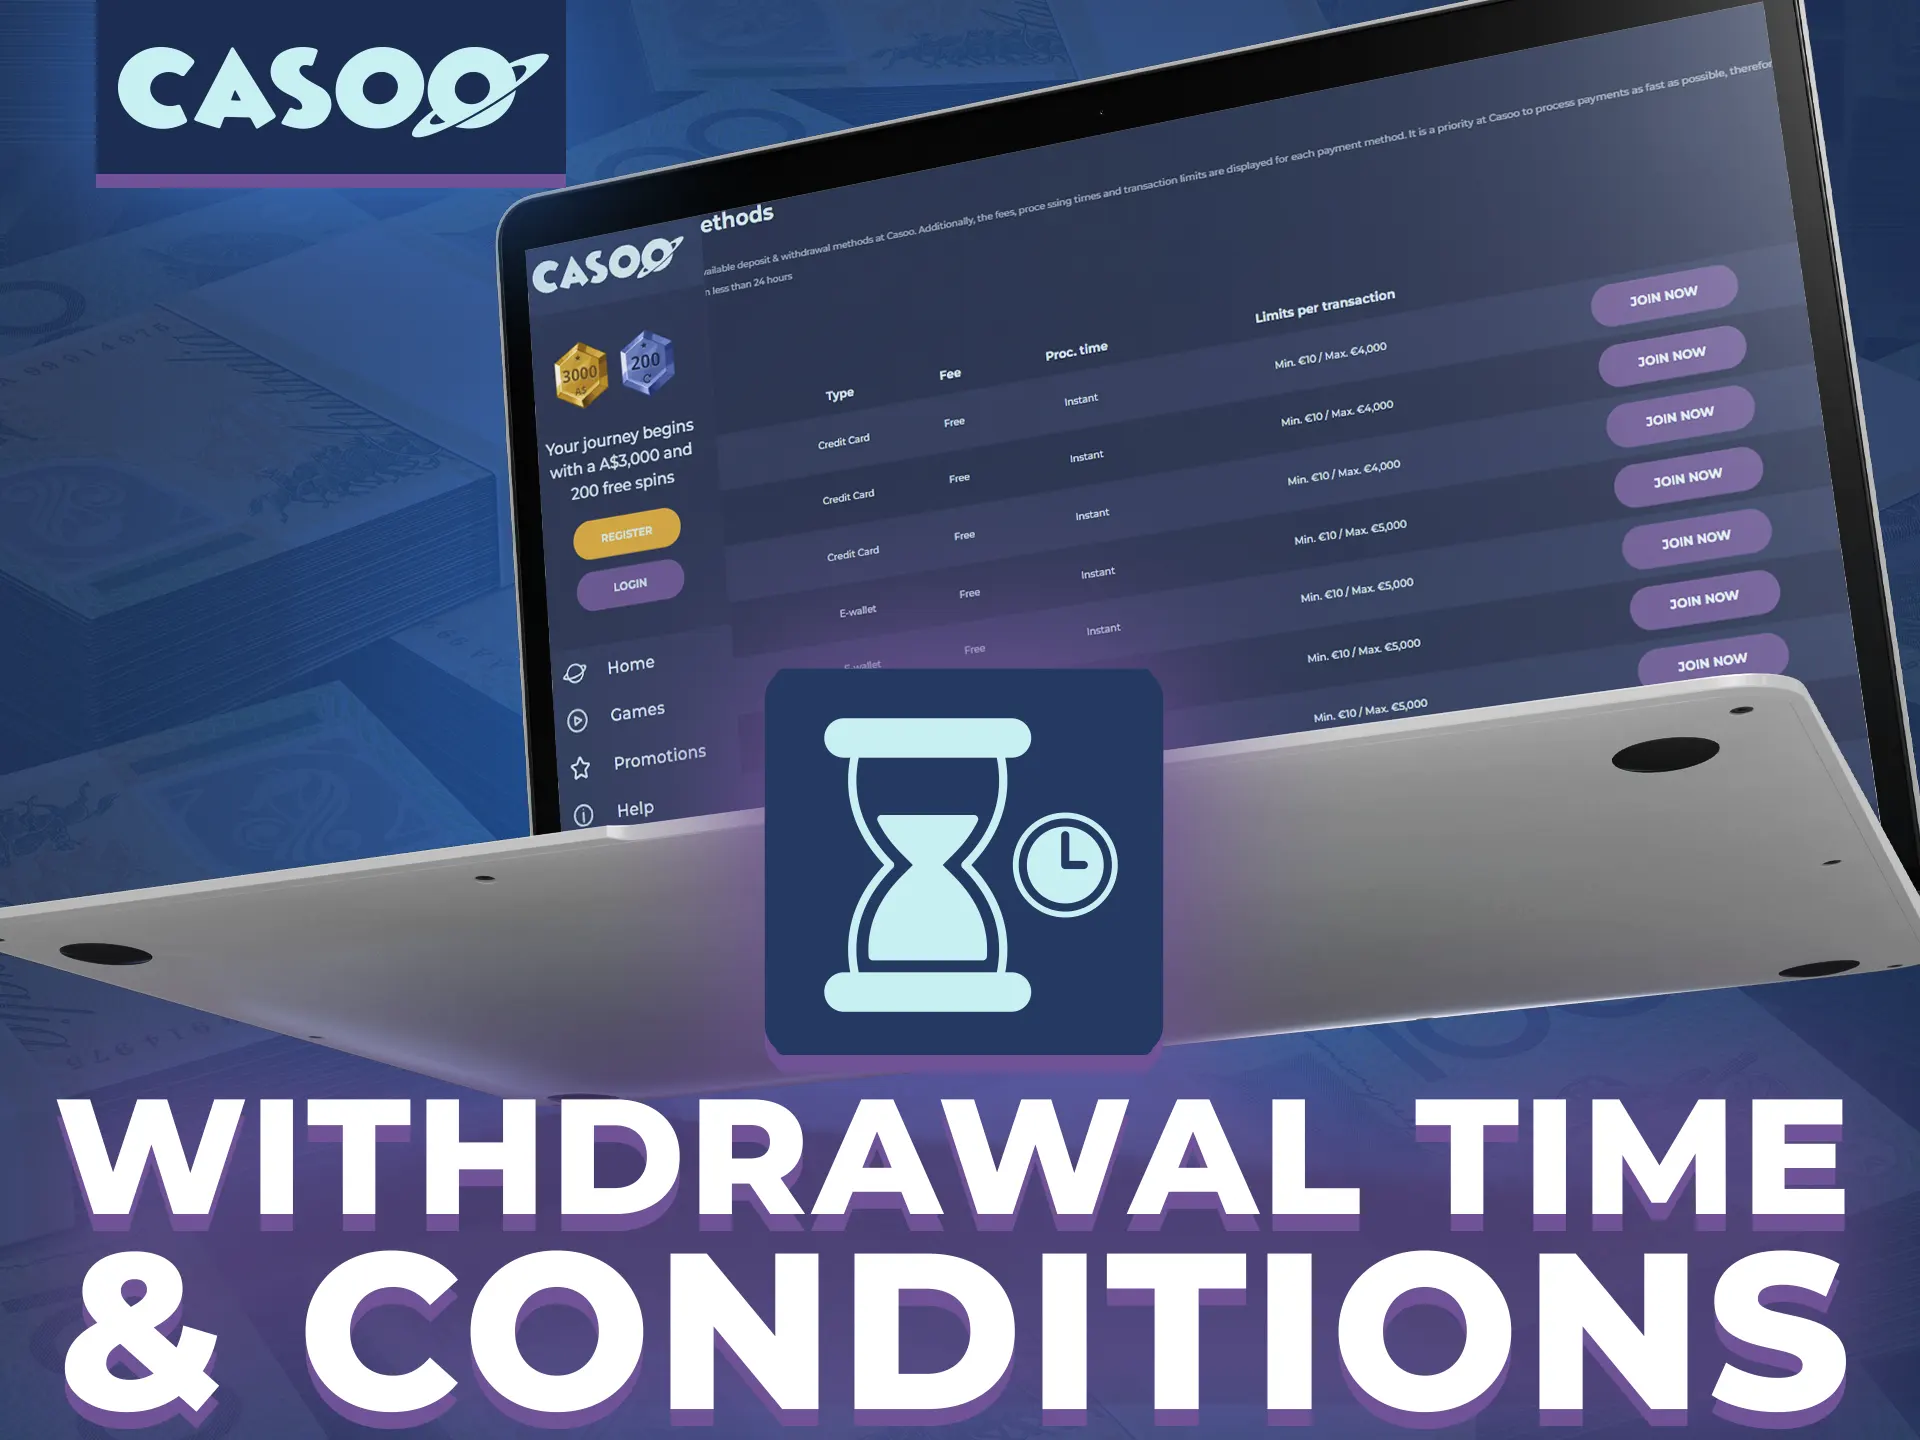 Casoo Withdrawal Guidelines: Maintain balance, verify identity, choose method, observe limits, provide accurate information, and wait.